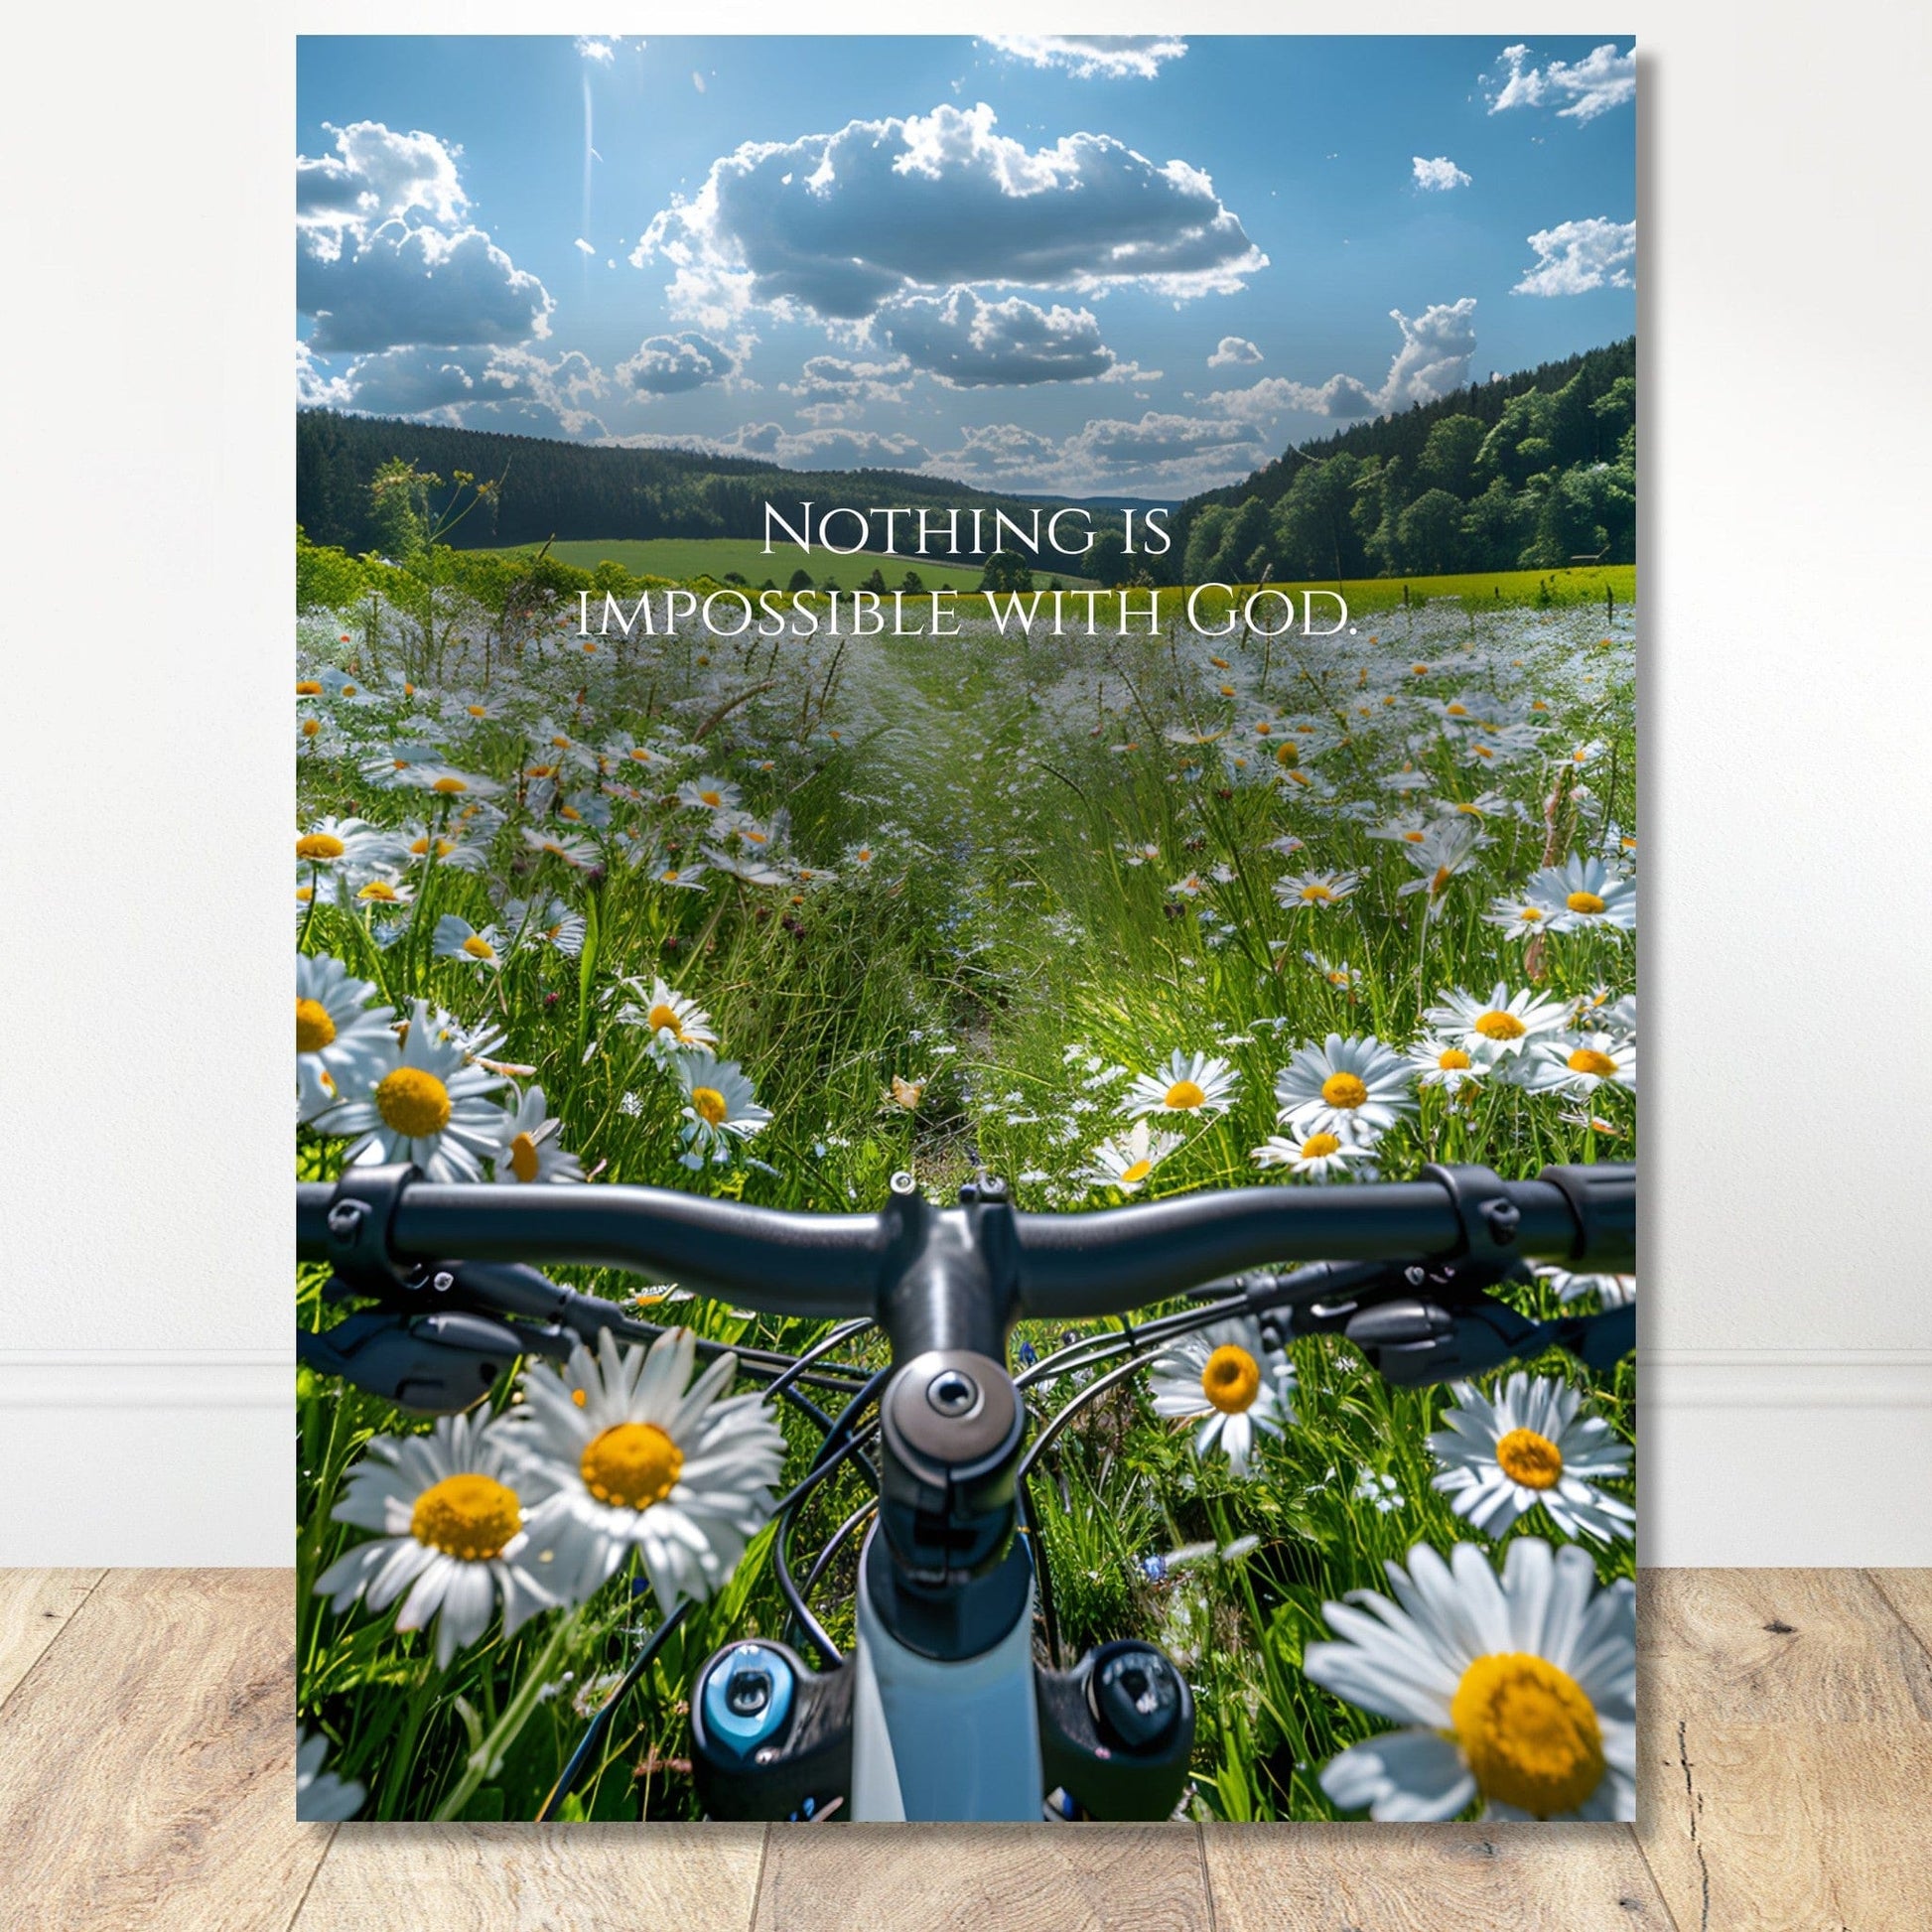 Coffee With My Father Print Material 45x60 cm / 18x24″ / Premium Matte Paper Poster / - Nothing is Impossible With God - Artwork